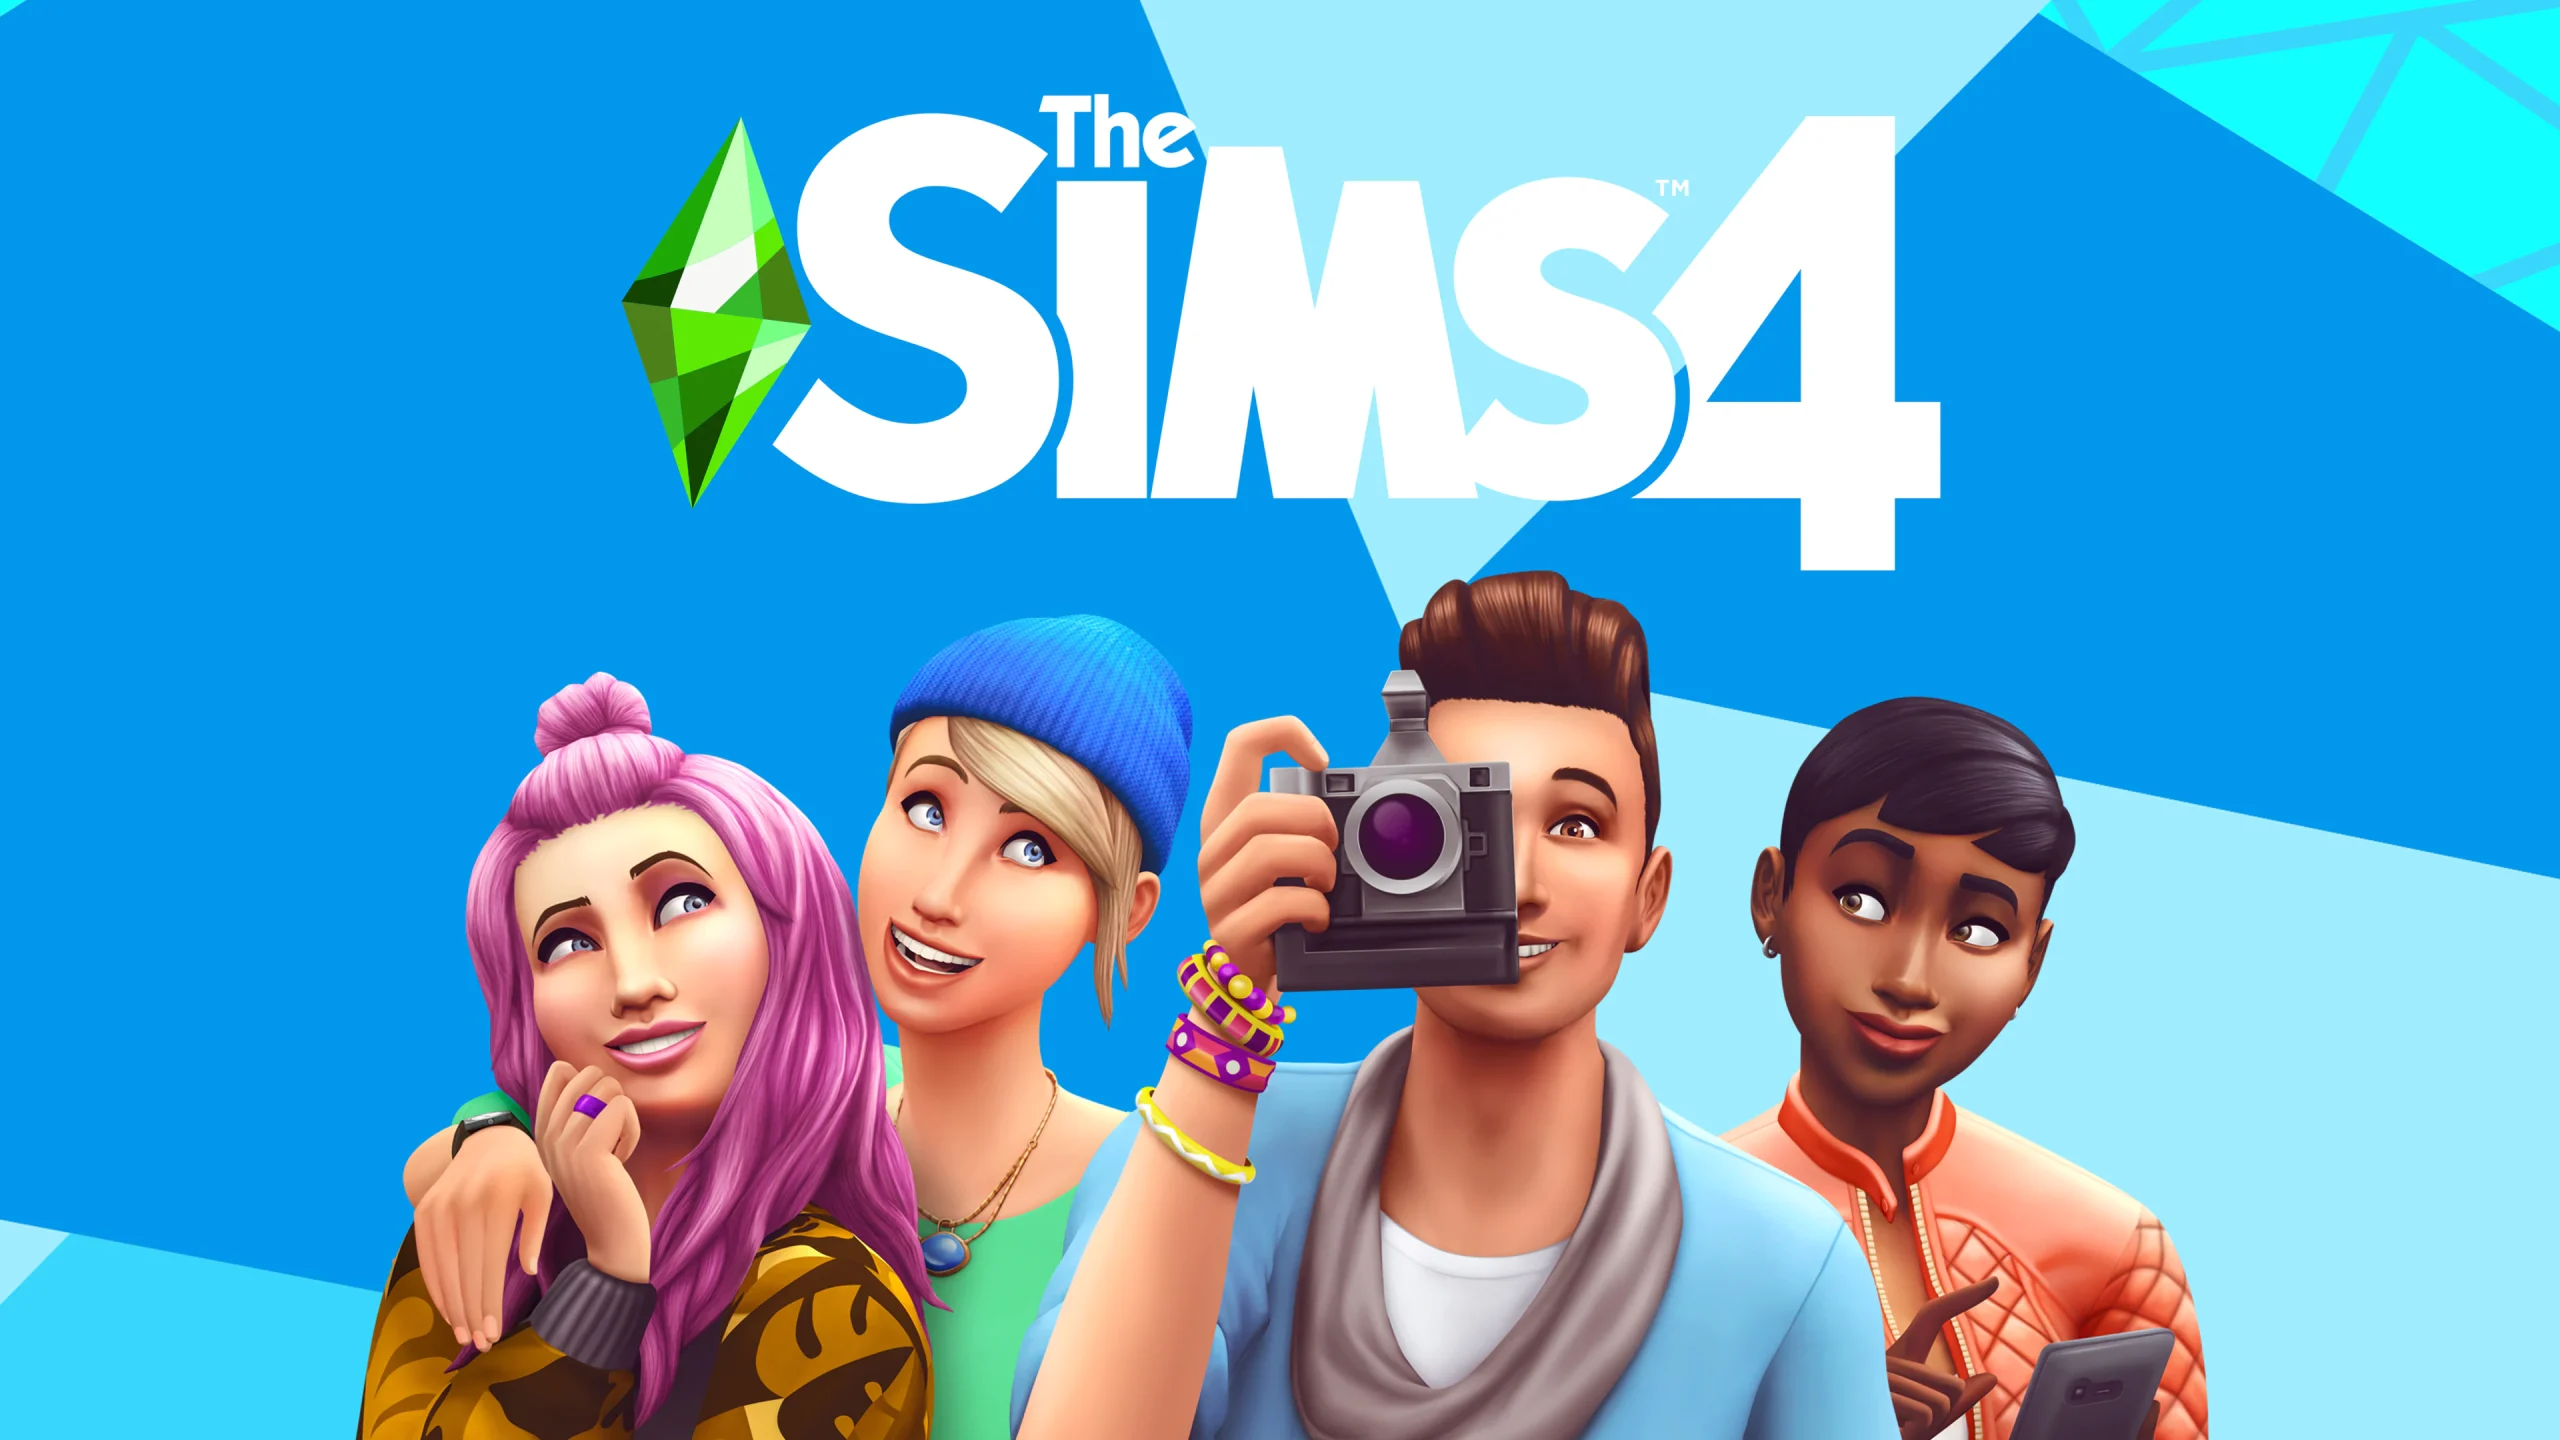 The Sims 4 Torrent PC Download: v1.100.147.1030 + DLCs